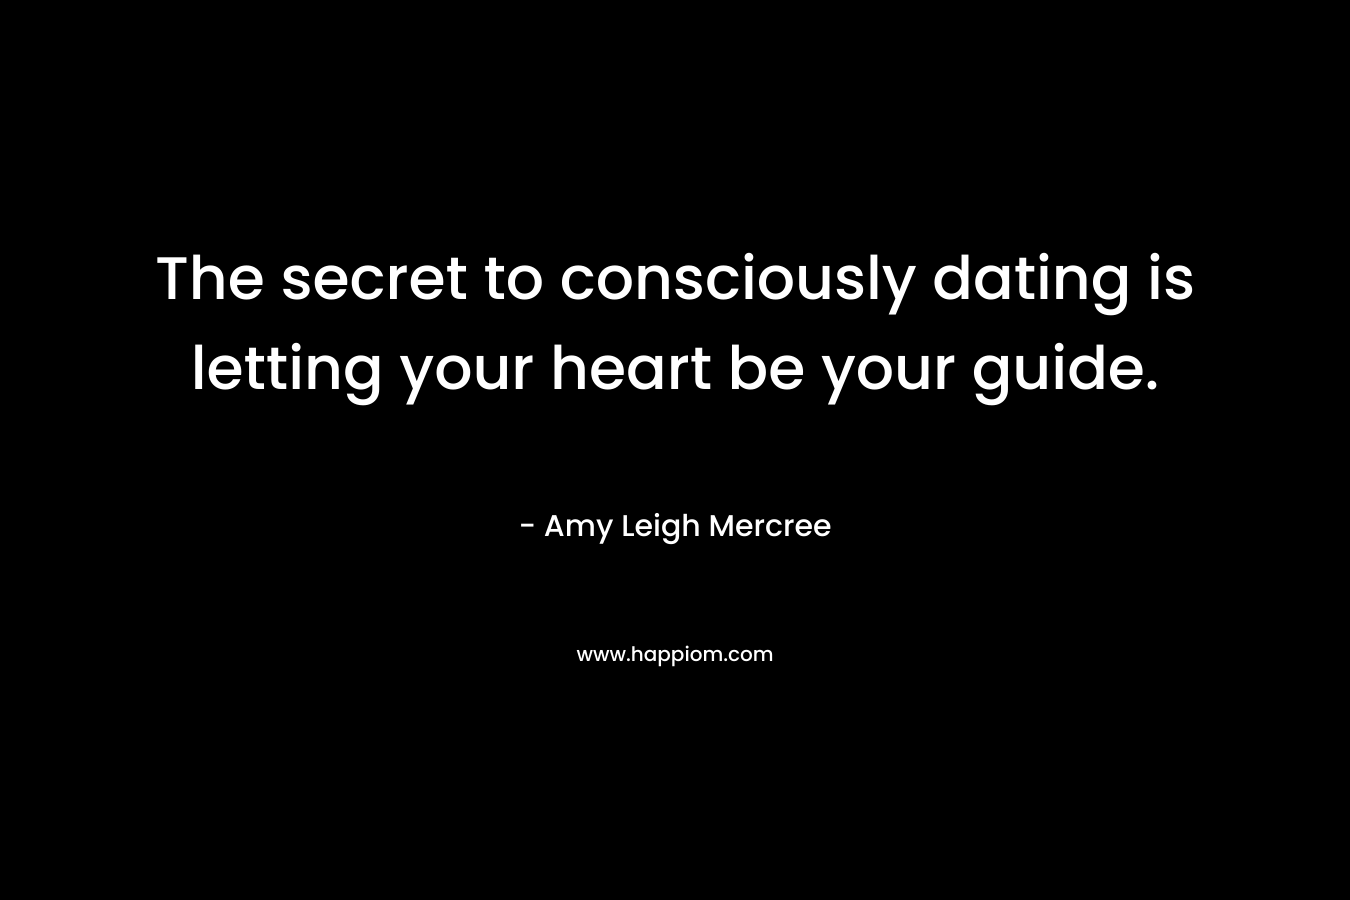 The secret to consciously dating is letting your heart be your guide. – Amy Leigh Mercree